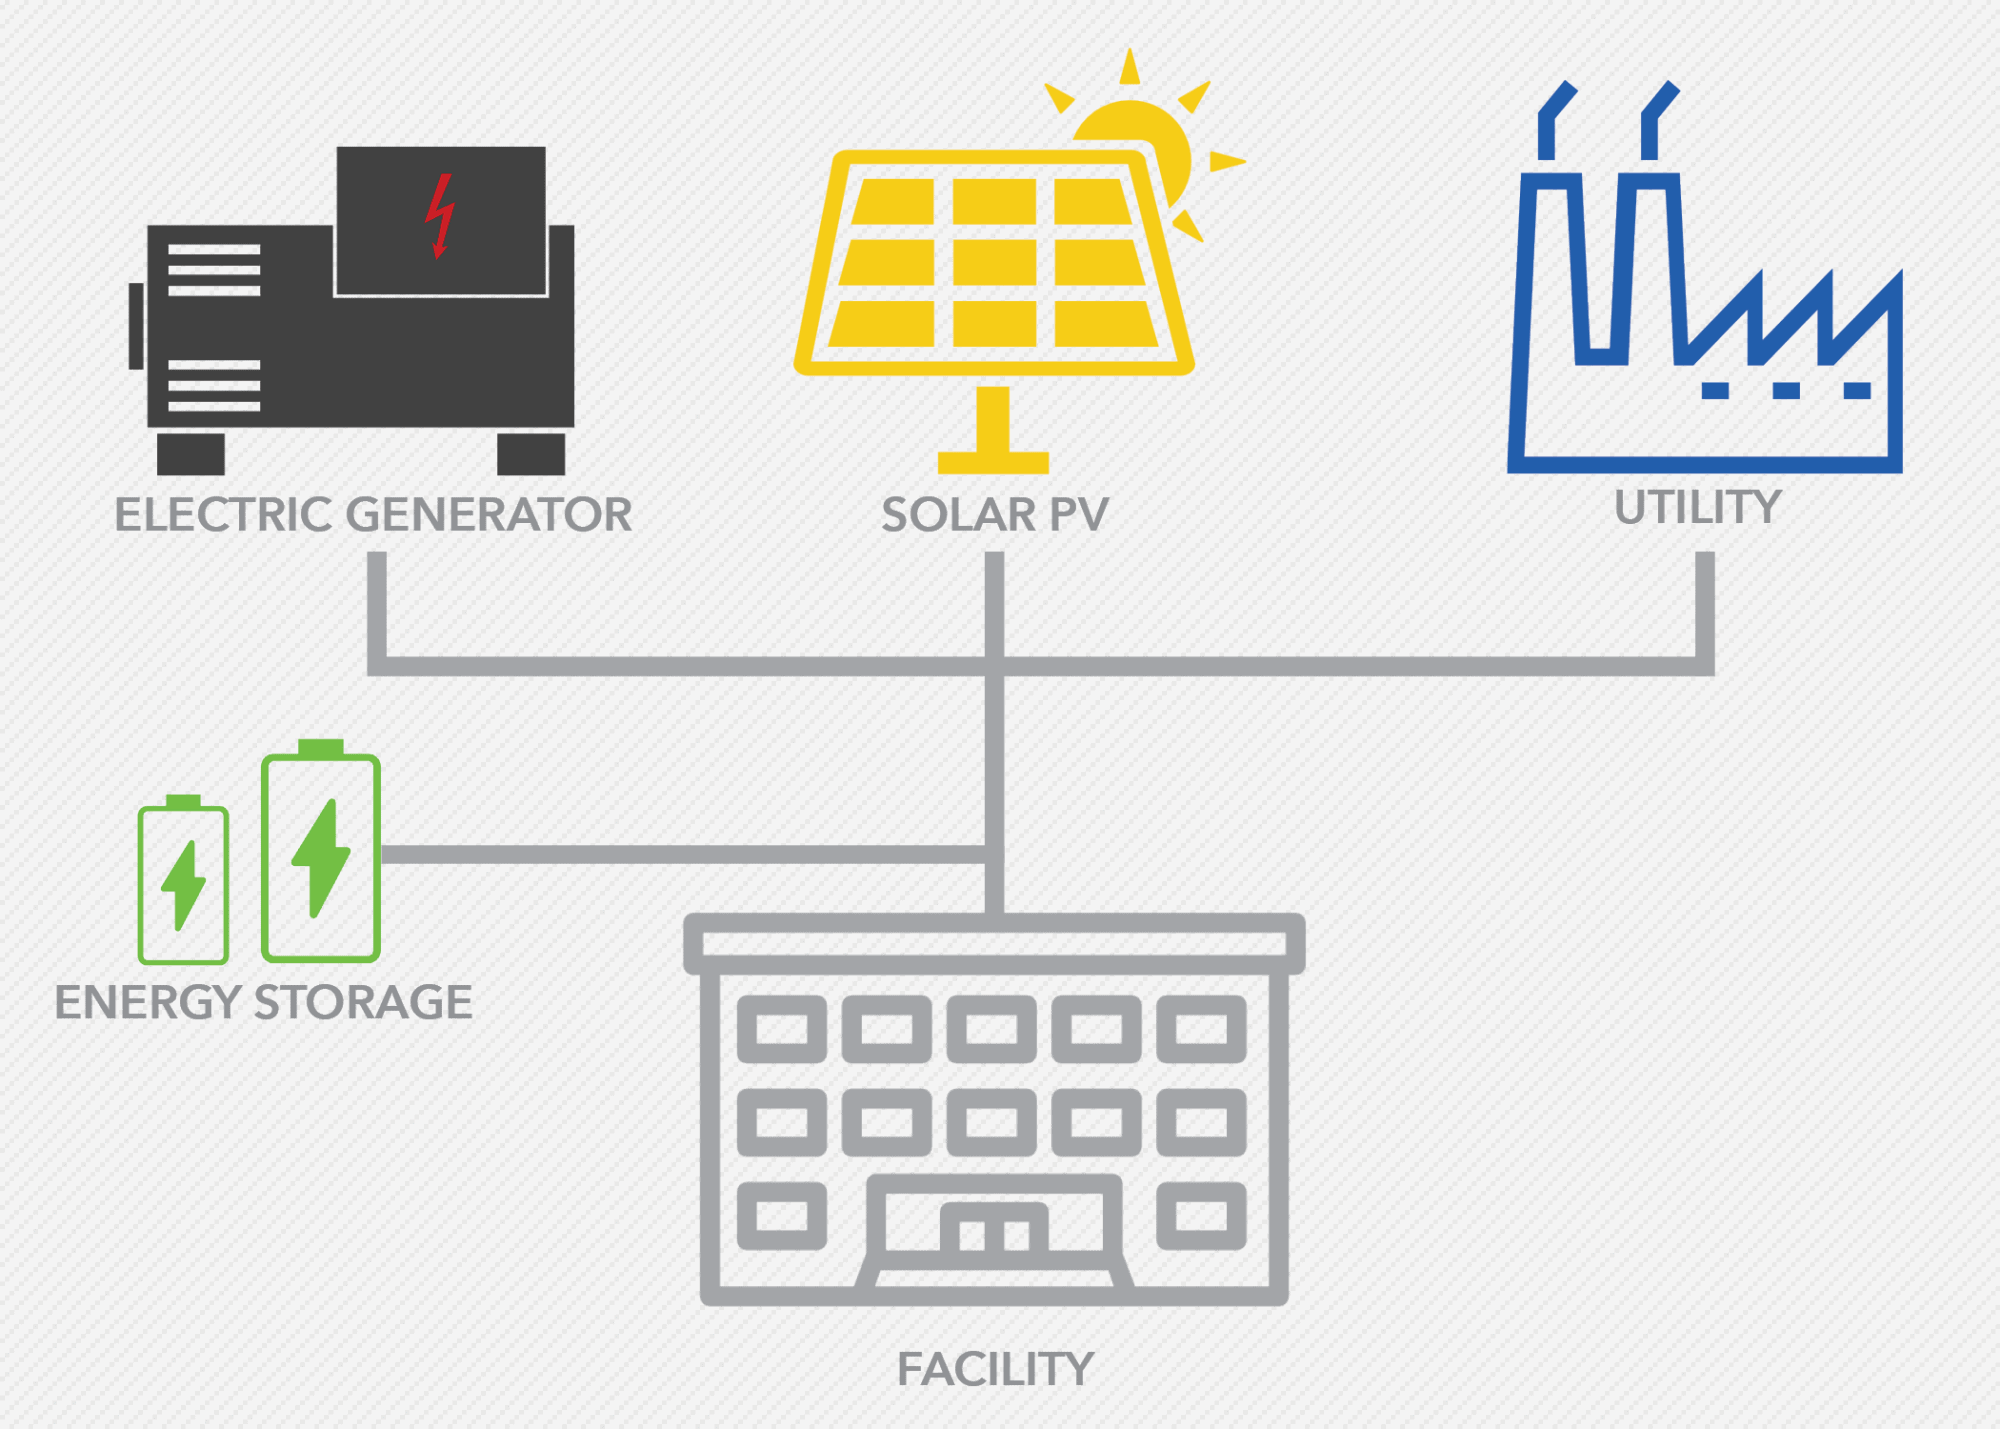 Process infographic describing how solar microgrids connect with a utility